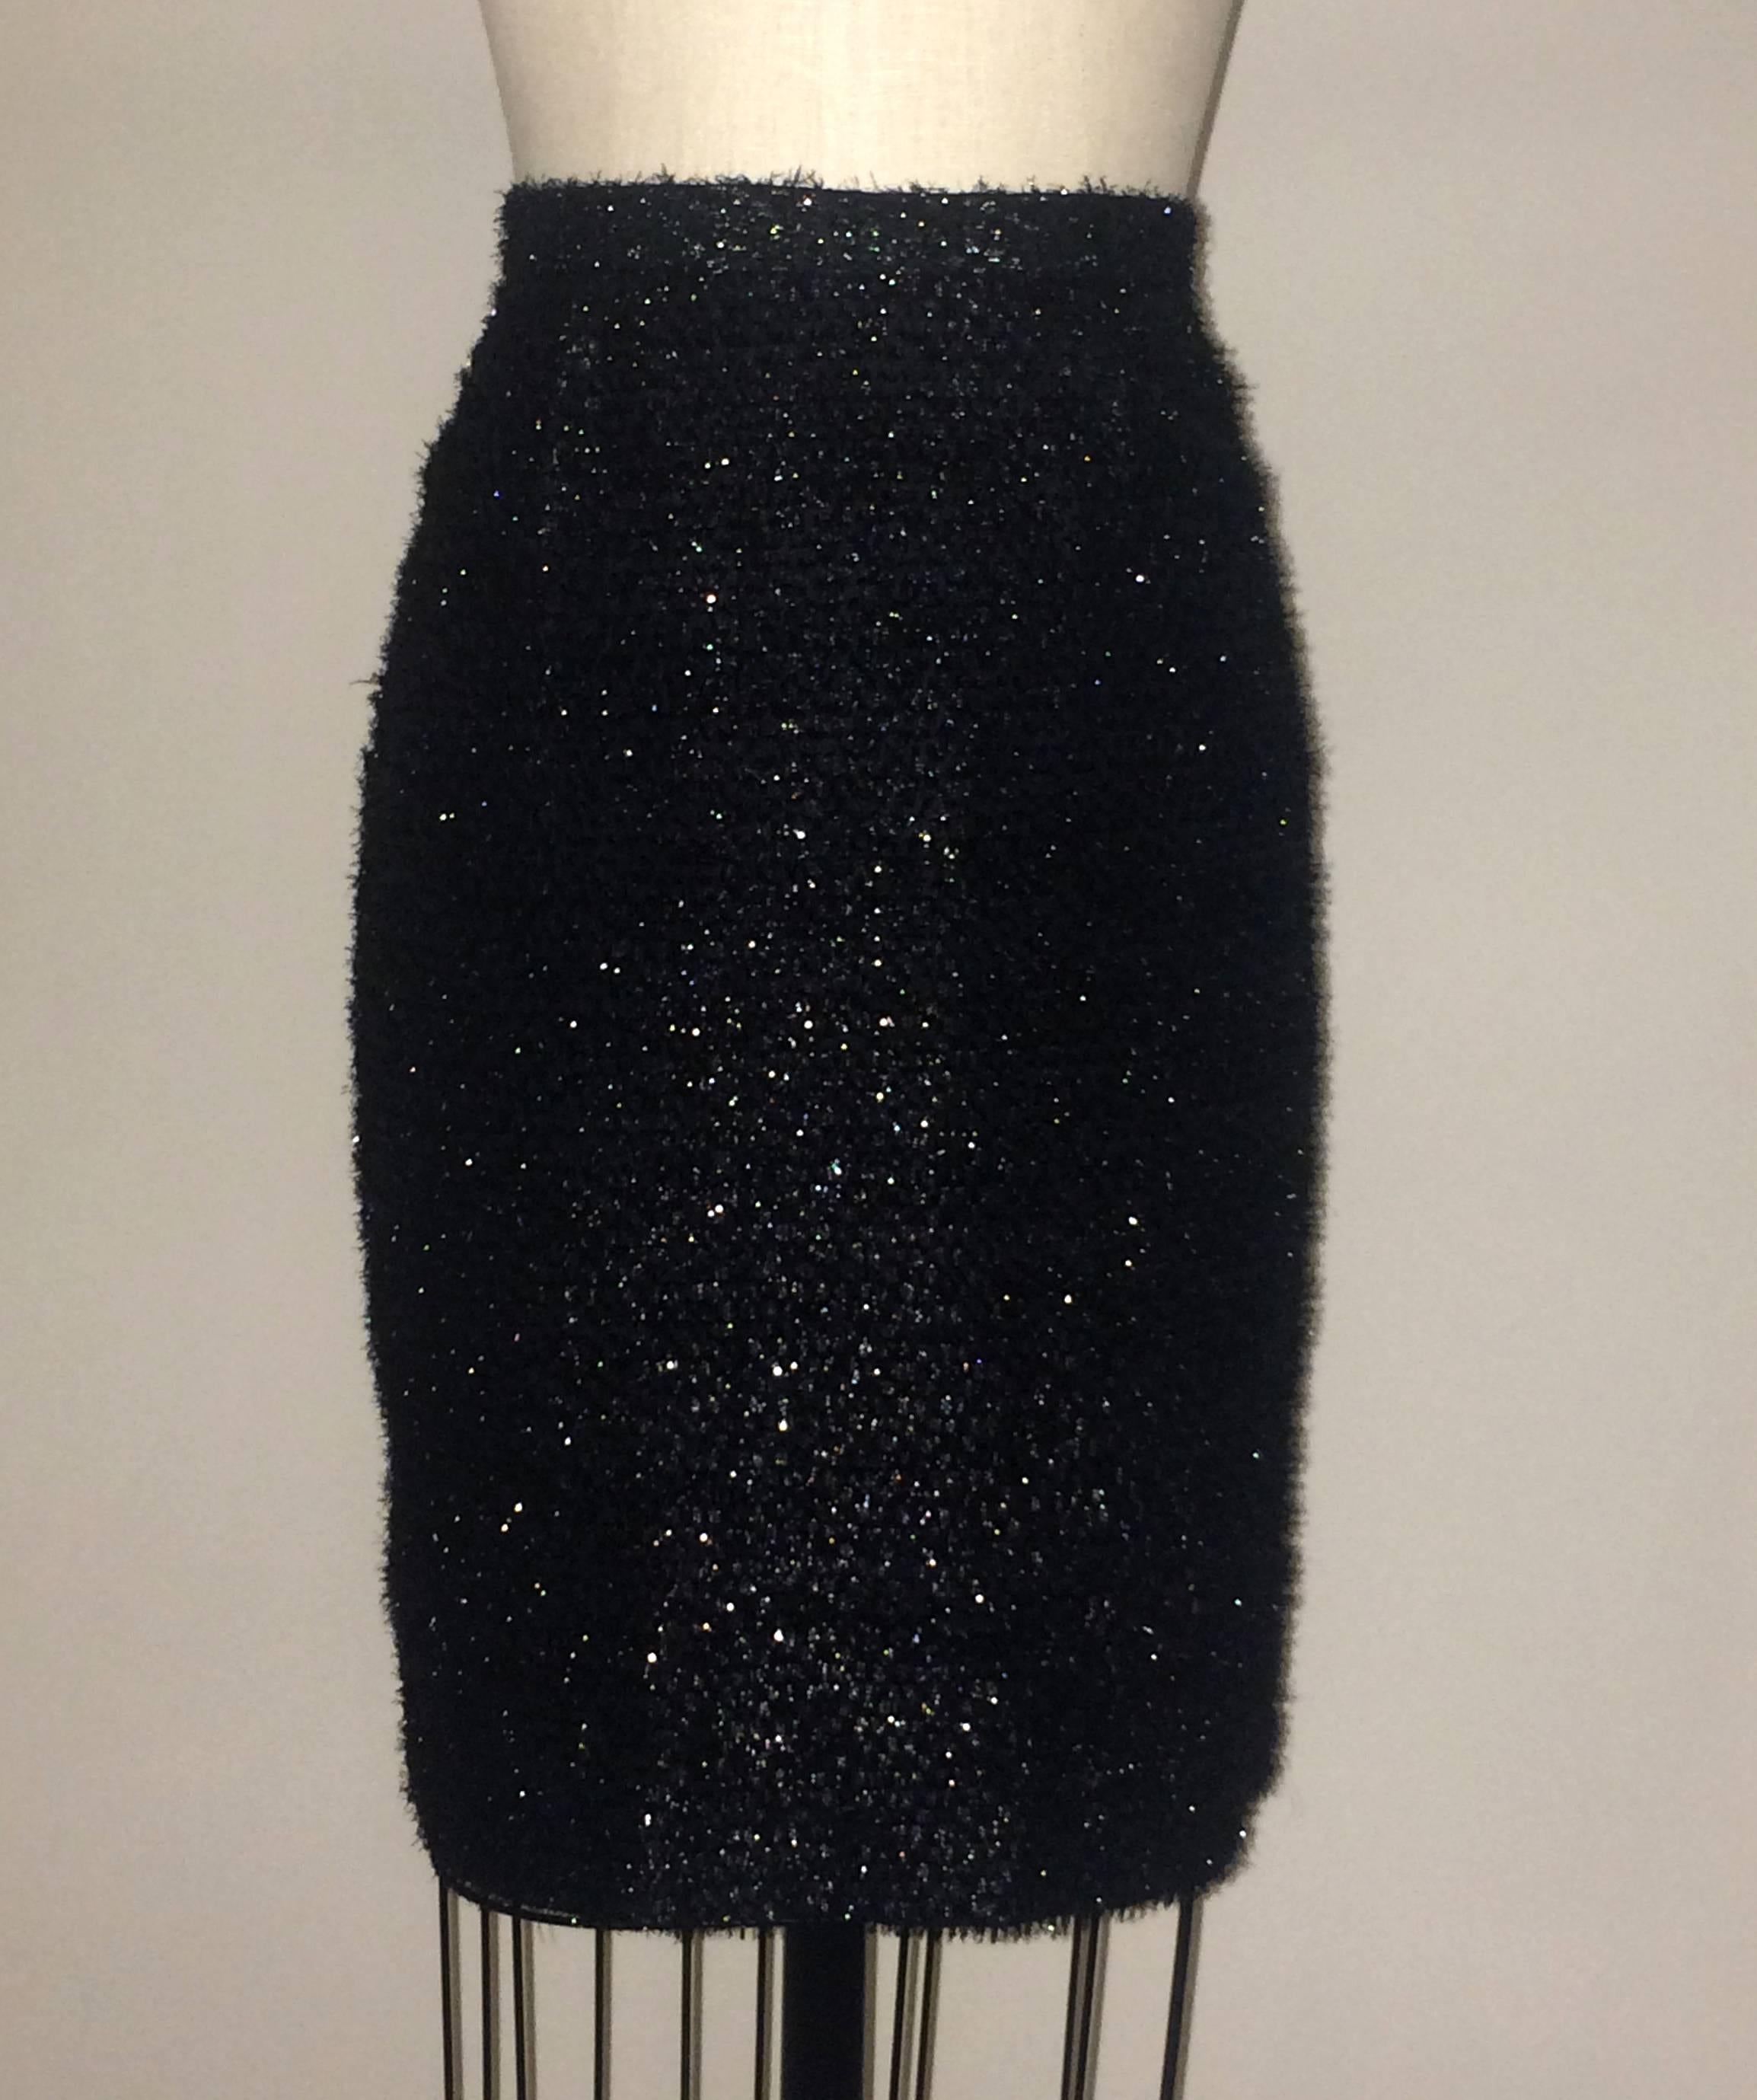 Stephen Sprouse 'Sprouse' vintage 1980s black pencil skirt with metallic eyelash fringe throughout. Back zip, hook, and button.

80% rayon, 20% polyester. Fully lined in 100% acetate.

Made in Korea. 

Size 8. Runs small, see measurements.
Waist